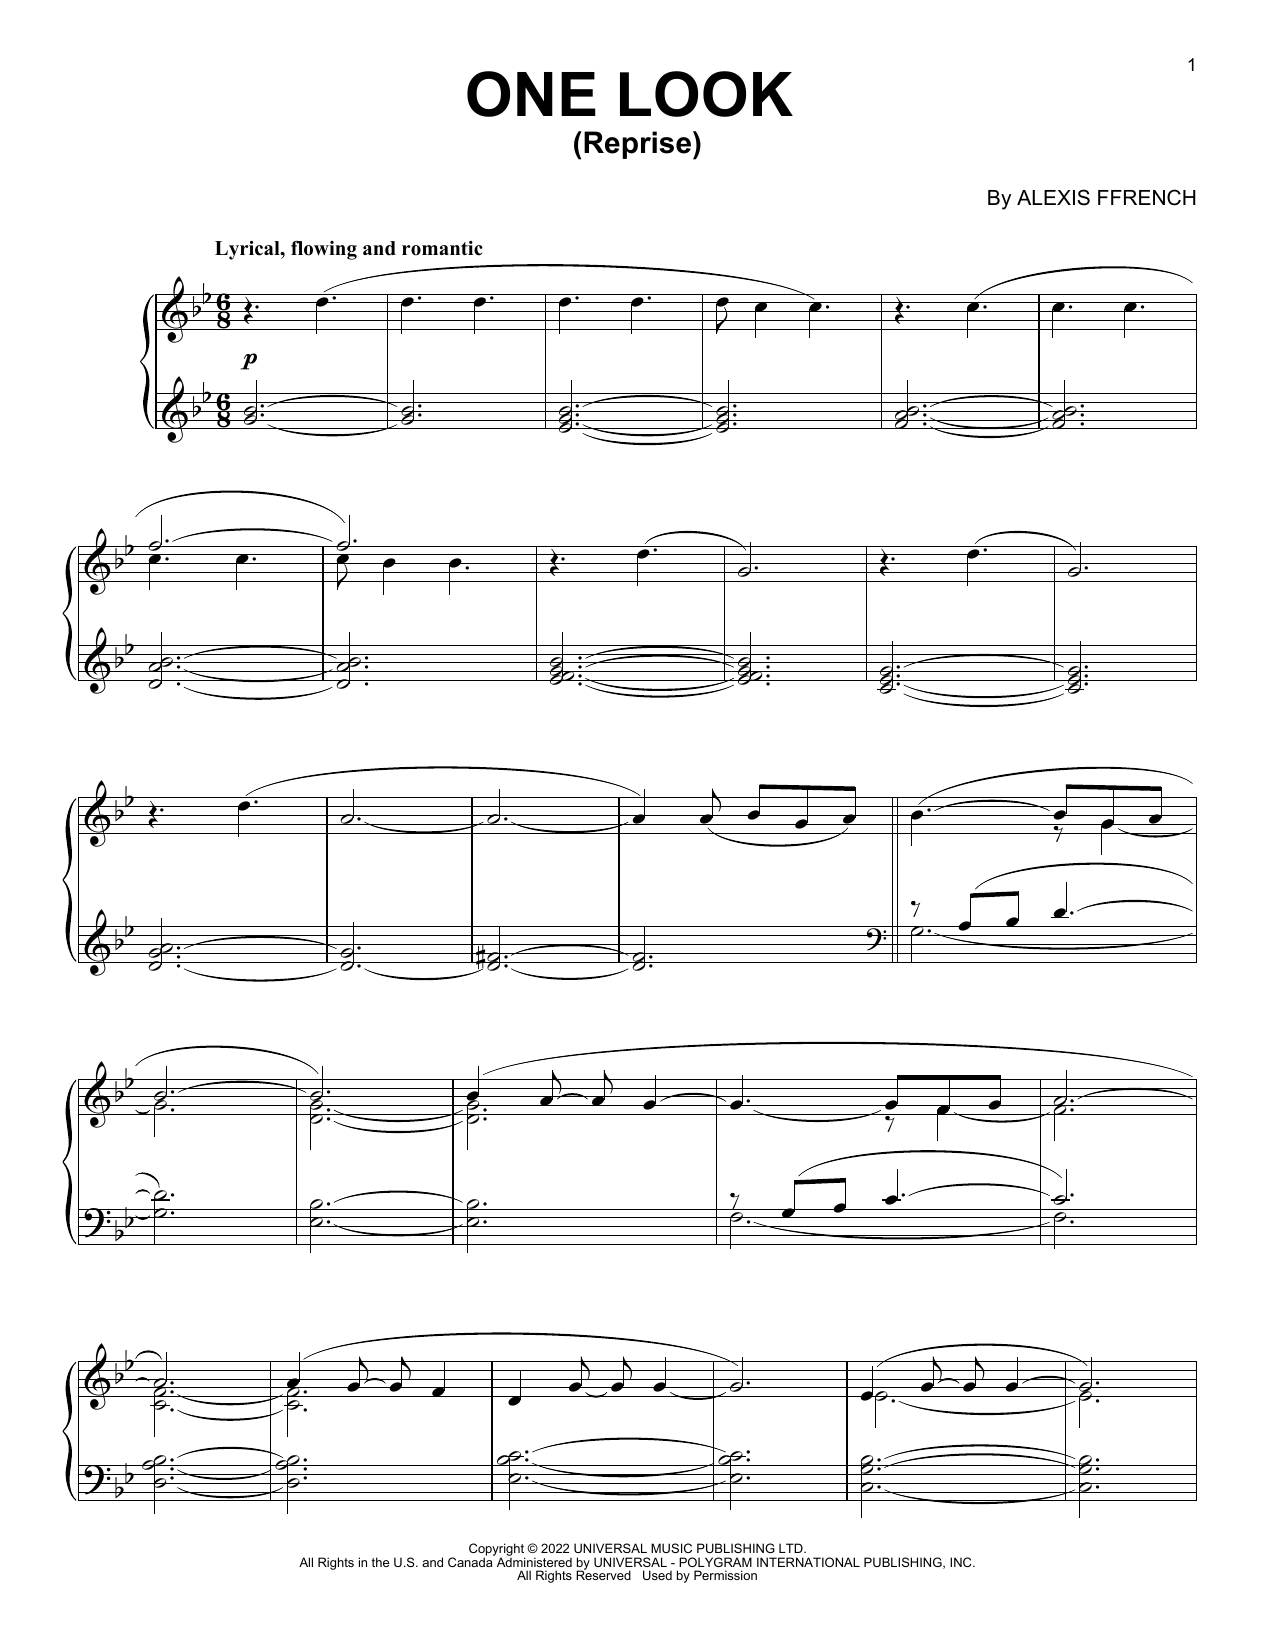 Download Alexis Ffrench One Look (Reprise) Sheet Music